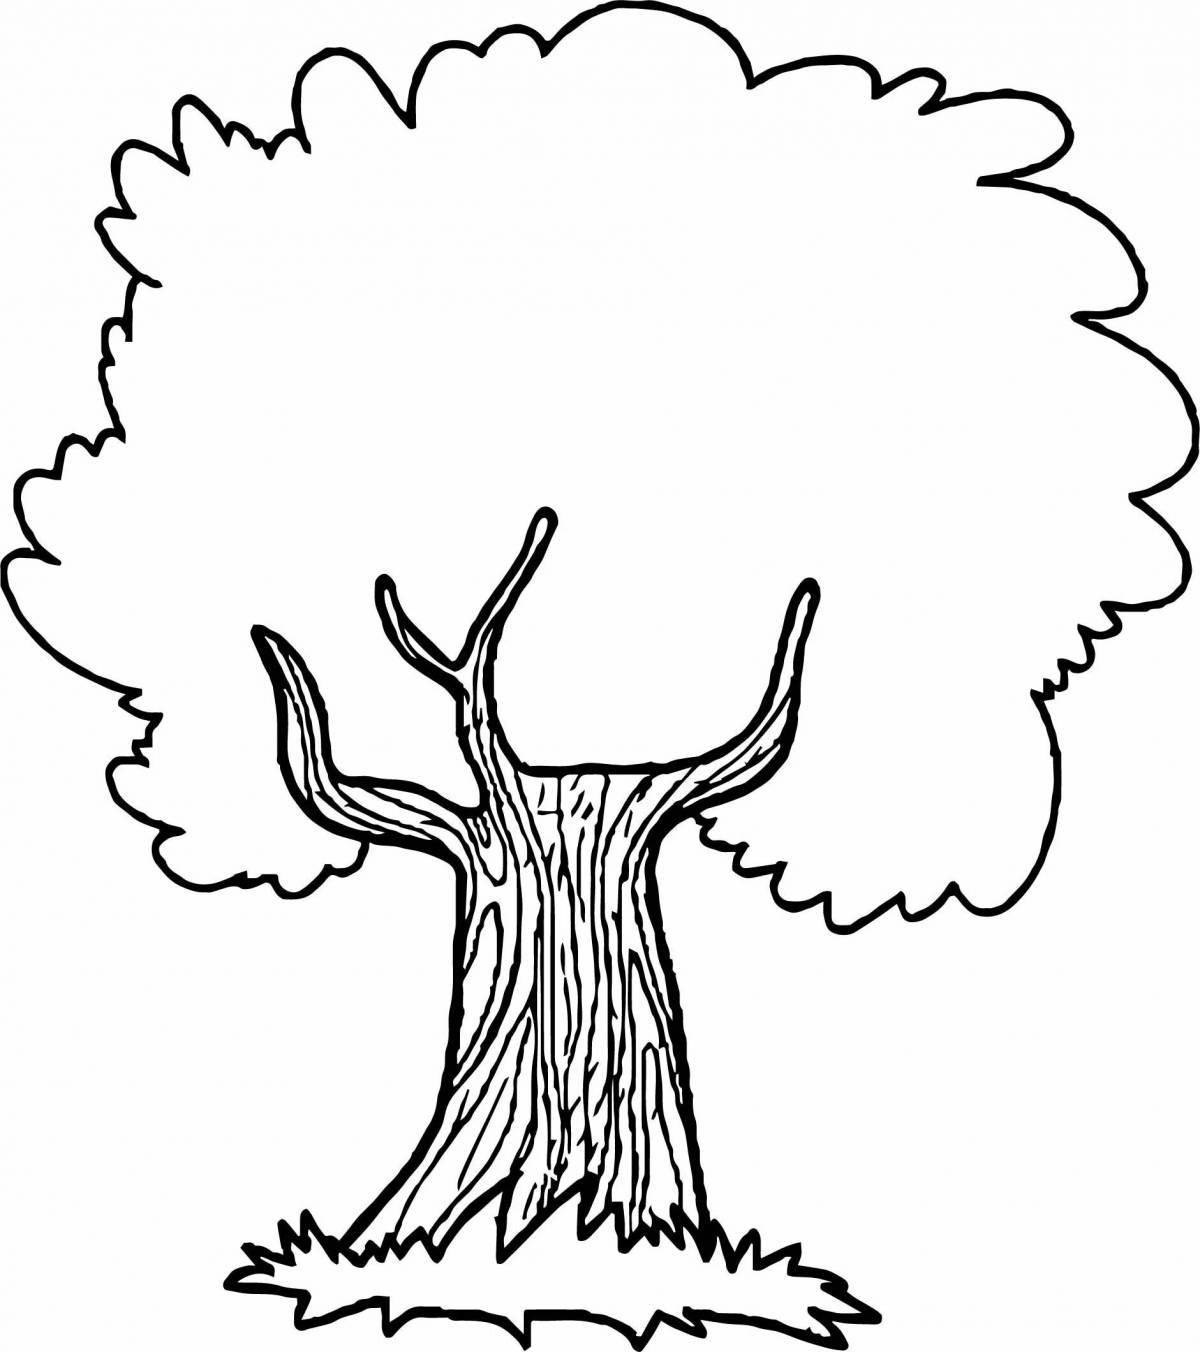 Exquisite oak coloring book for kids